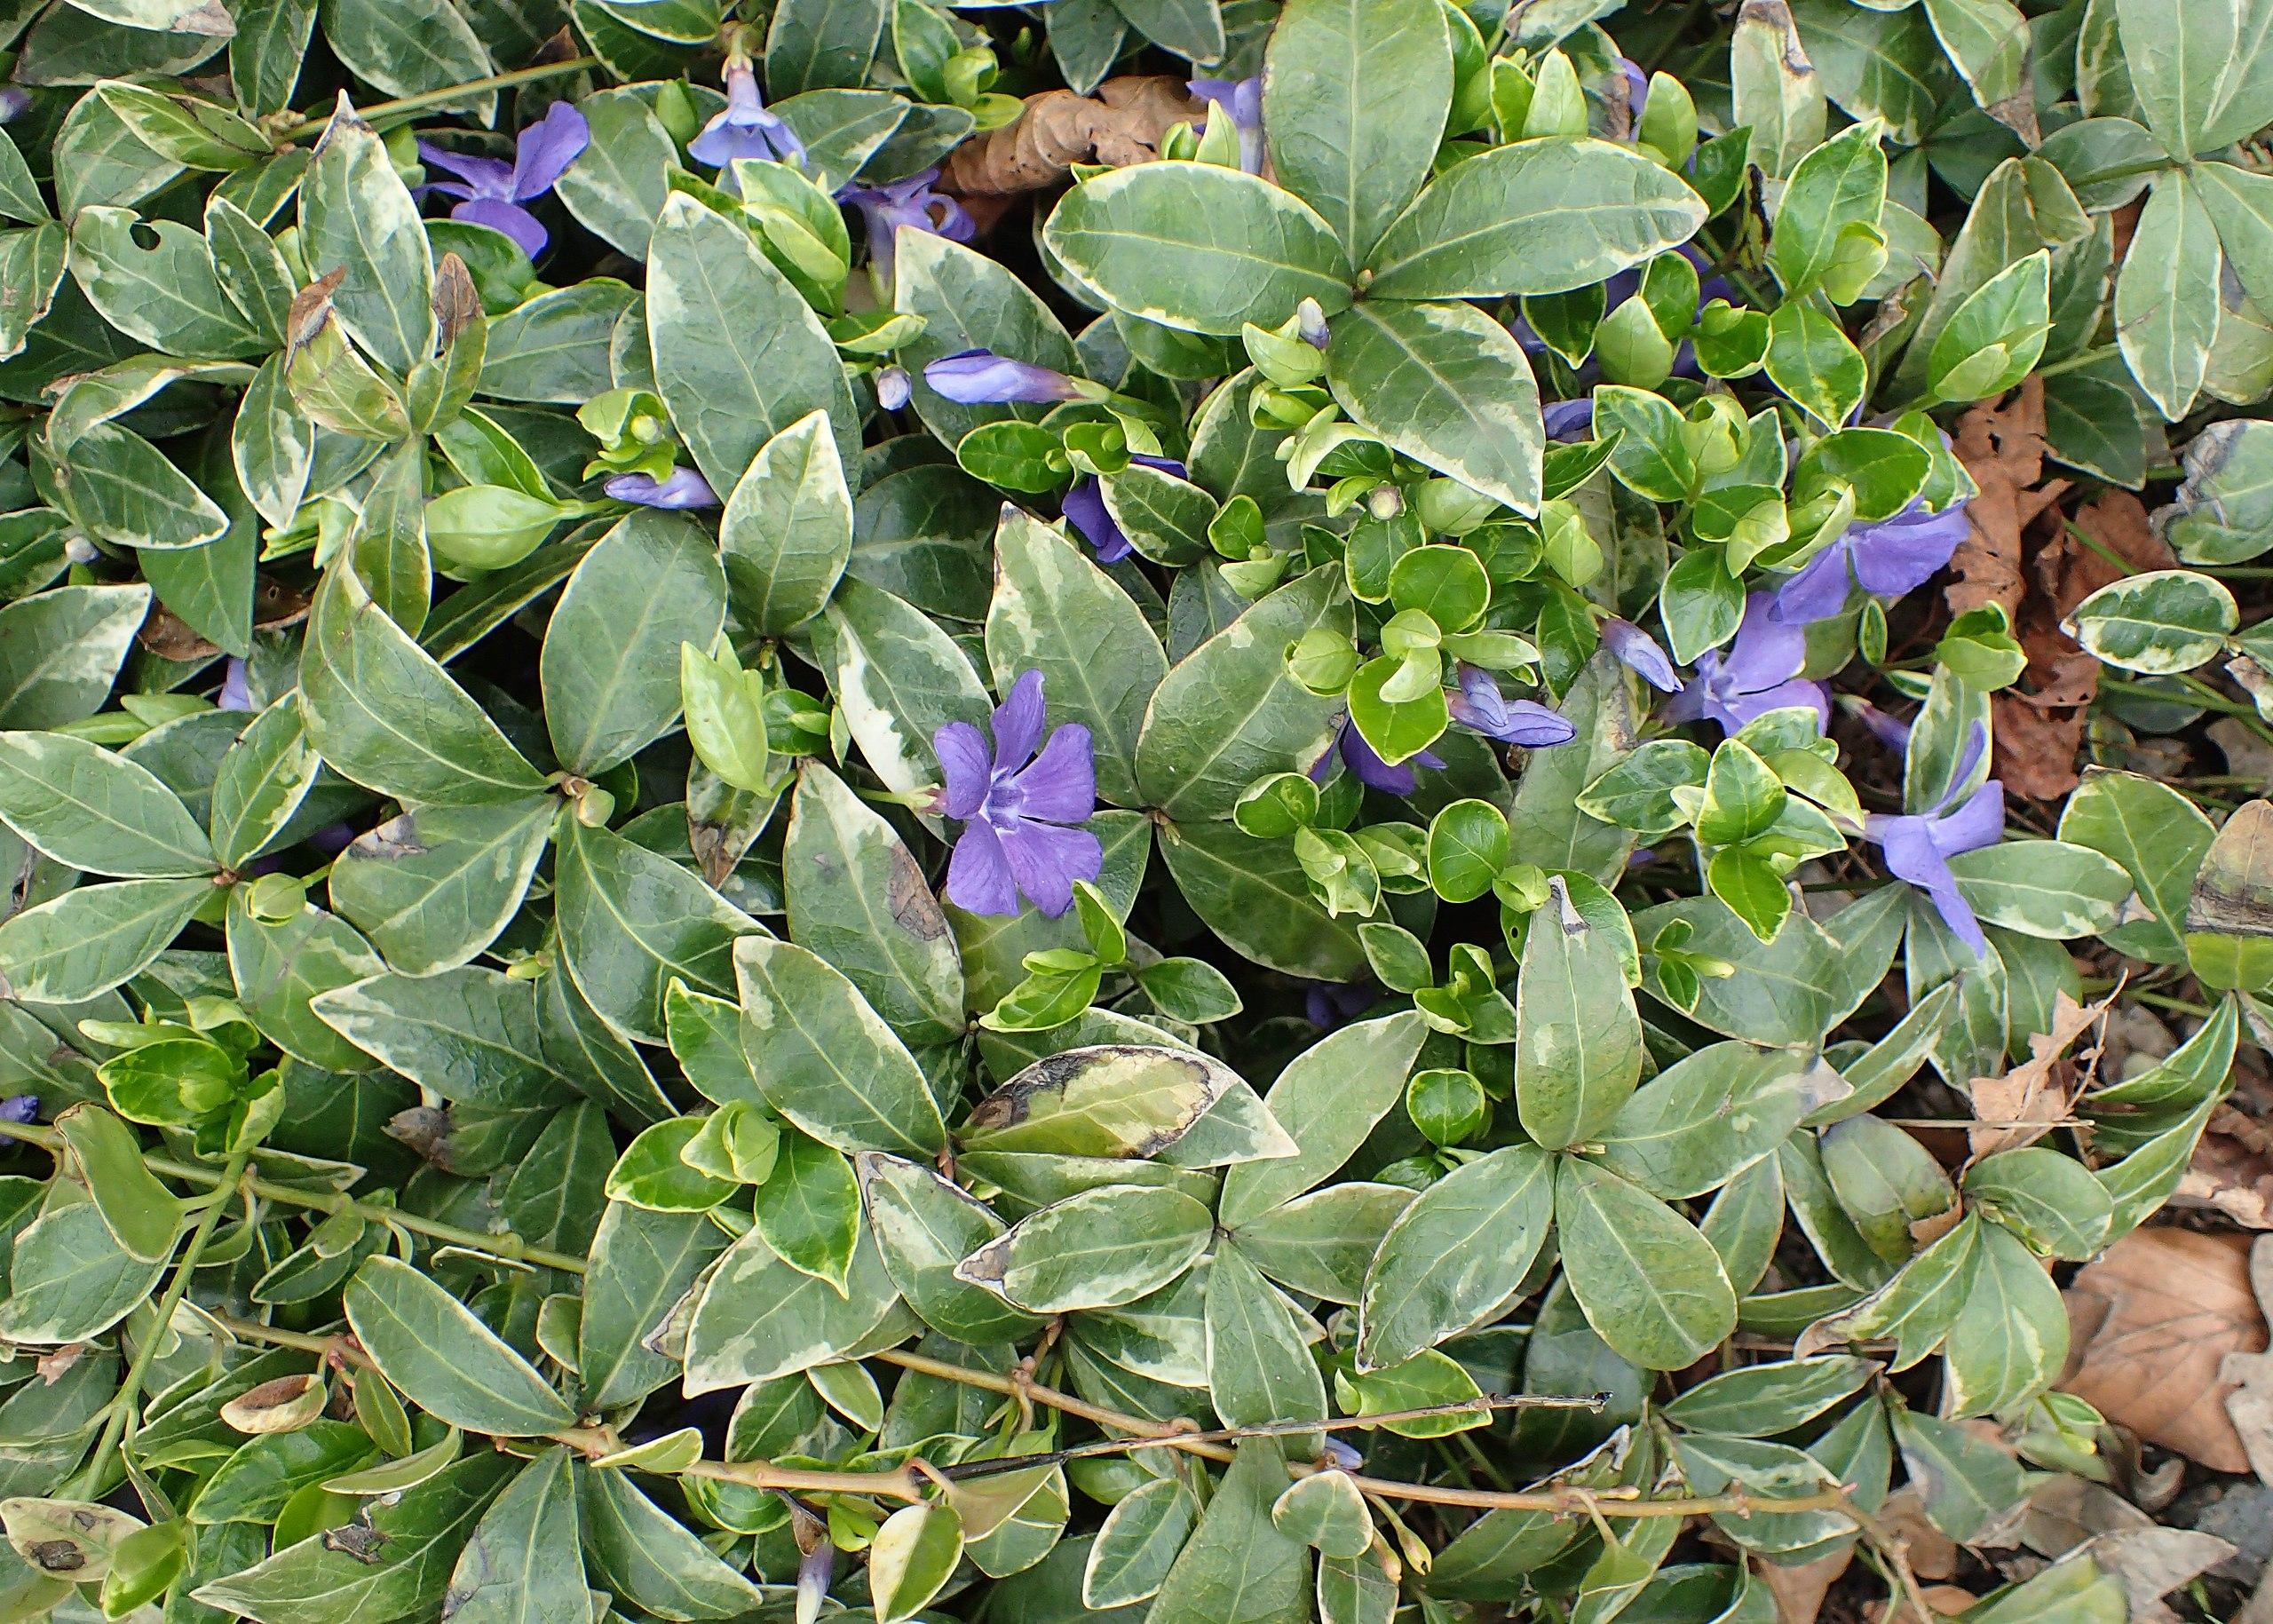 violet flowers with lime-green foliage and brown stems